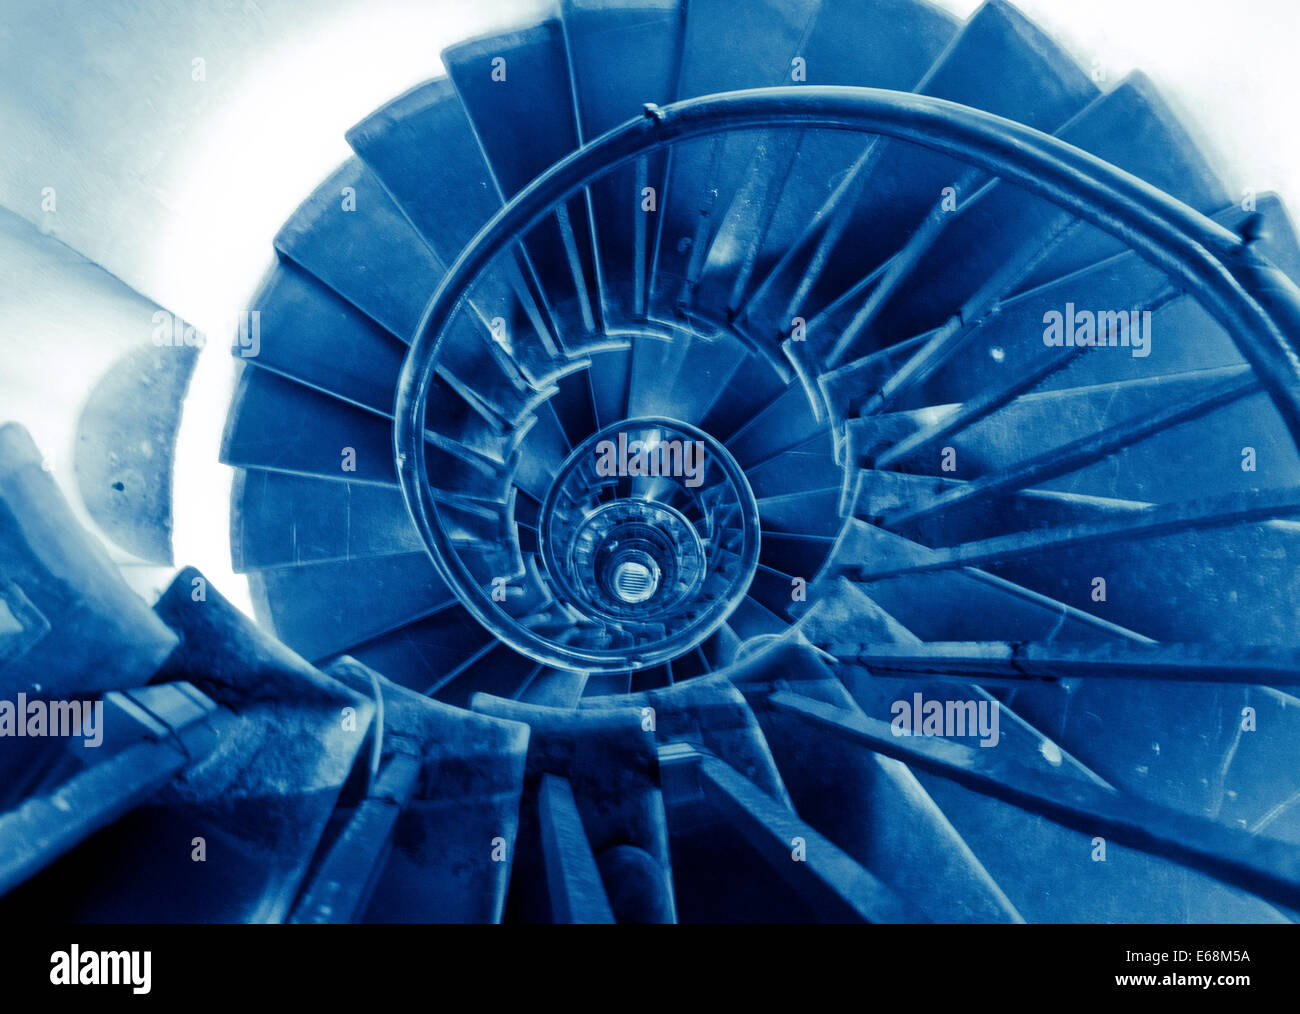 A spiral staircase bathed in blue light creates an interesting abstract image Stock Photo